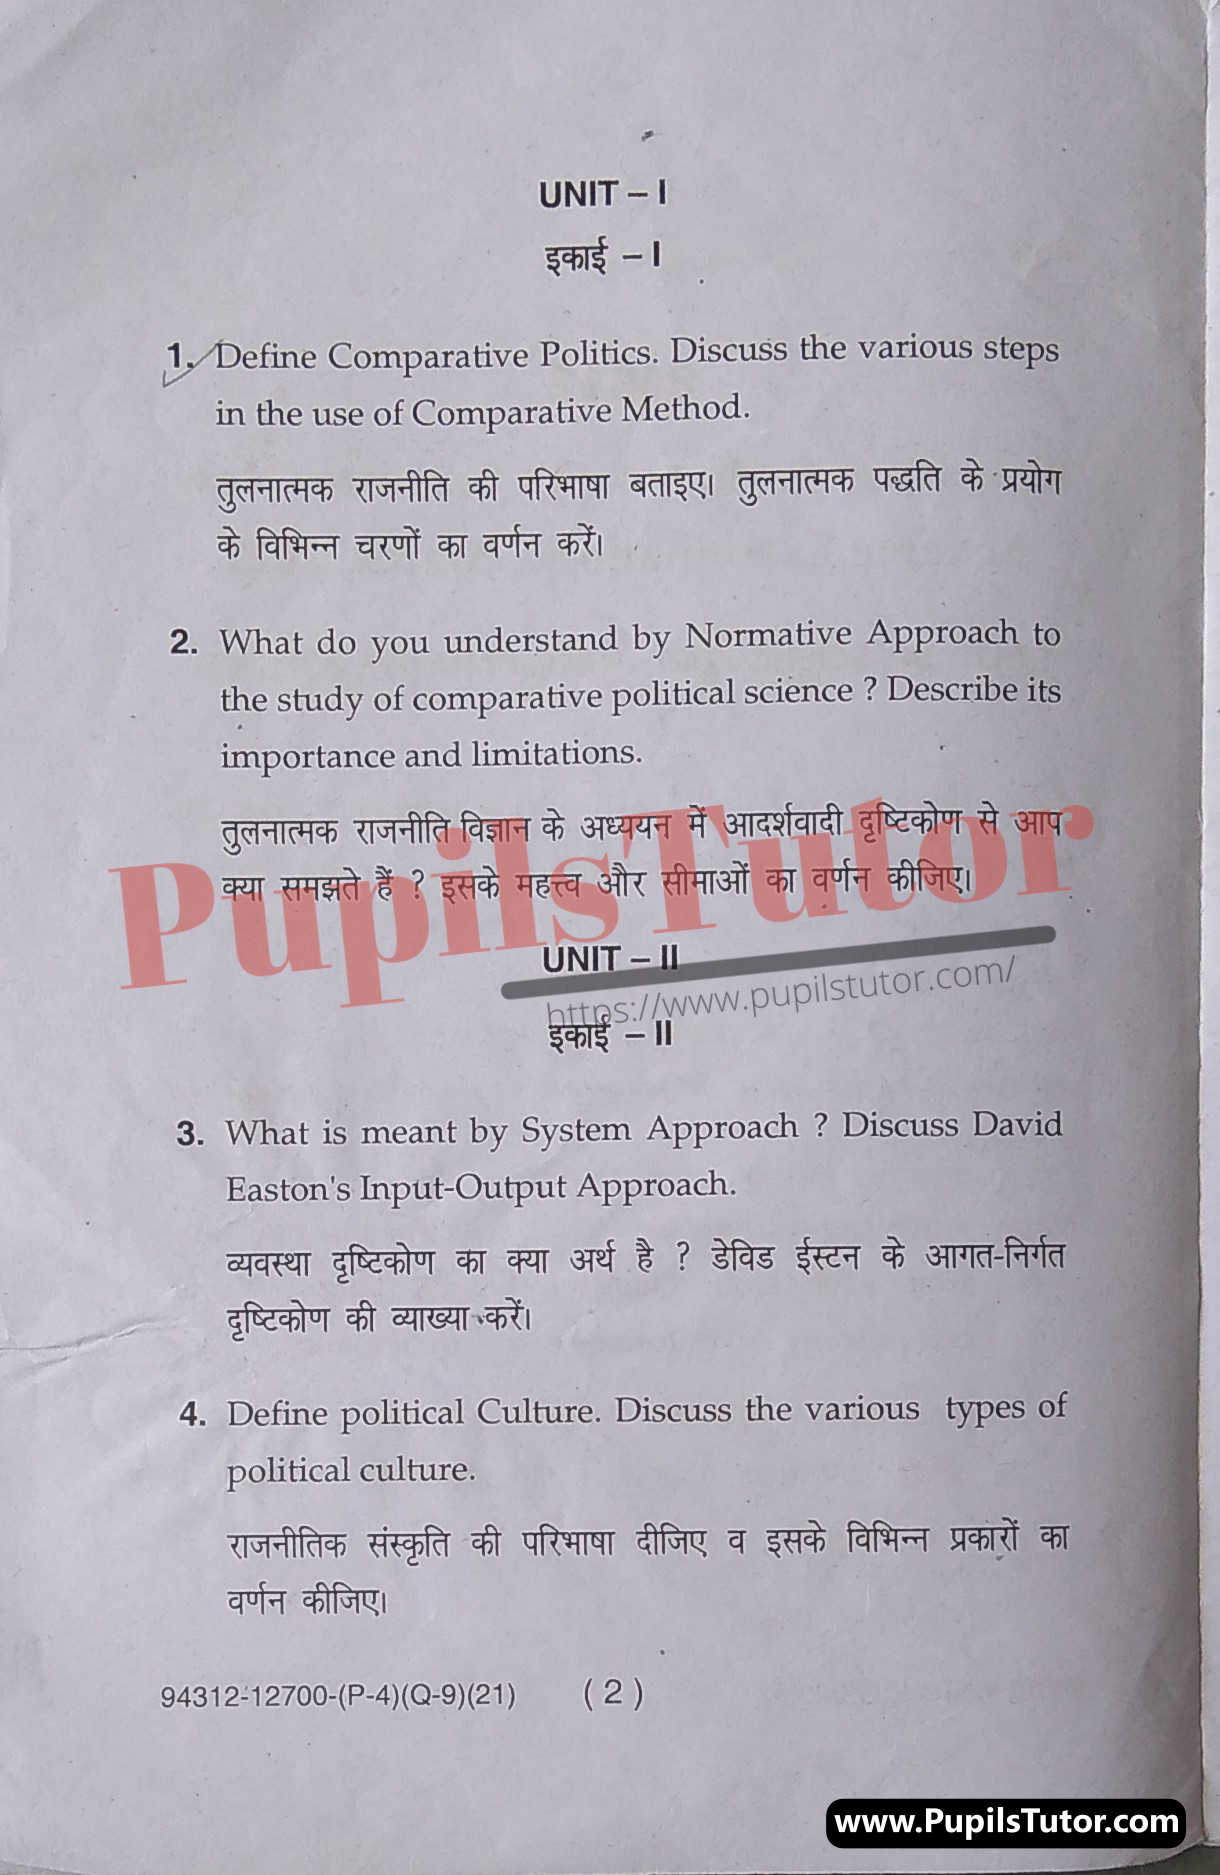 M.D. University B.A. Political Science (Comparative Politics) 5th Semester Important Question Answer And Solution - www.pupilstutor.com (Paper Page Number 2)